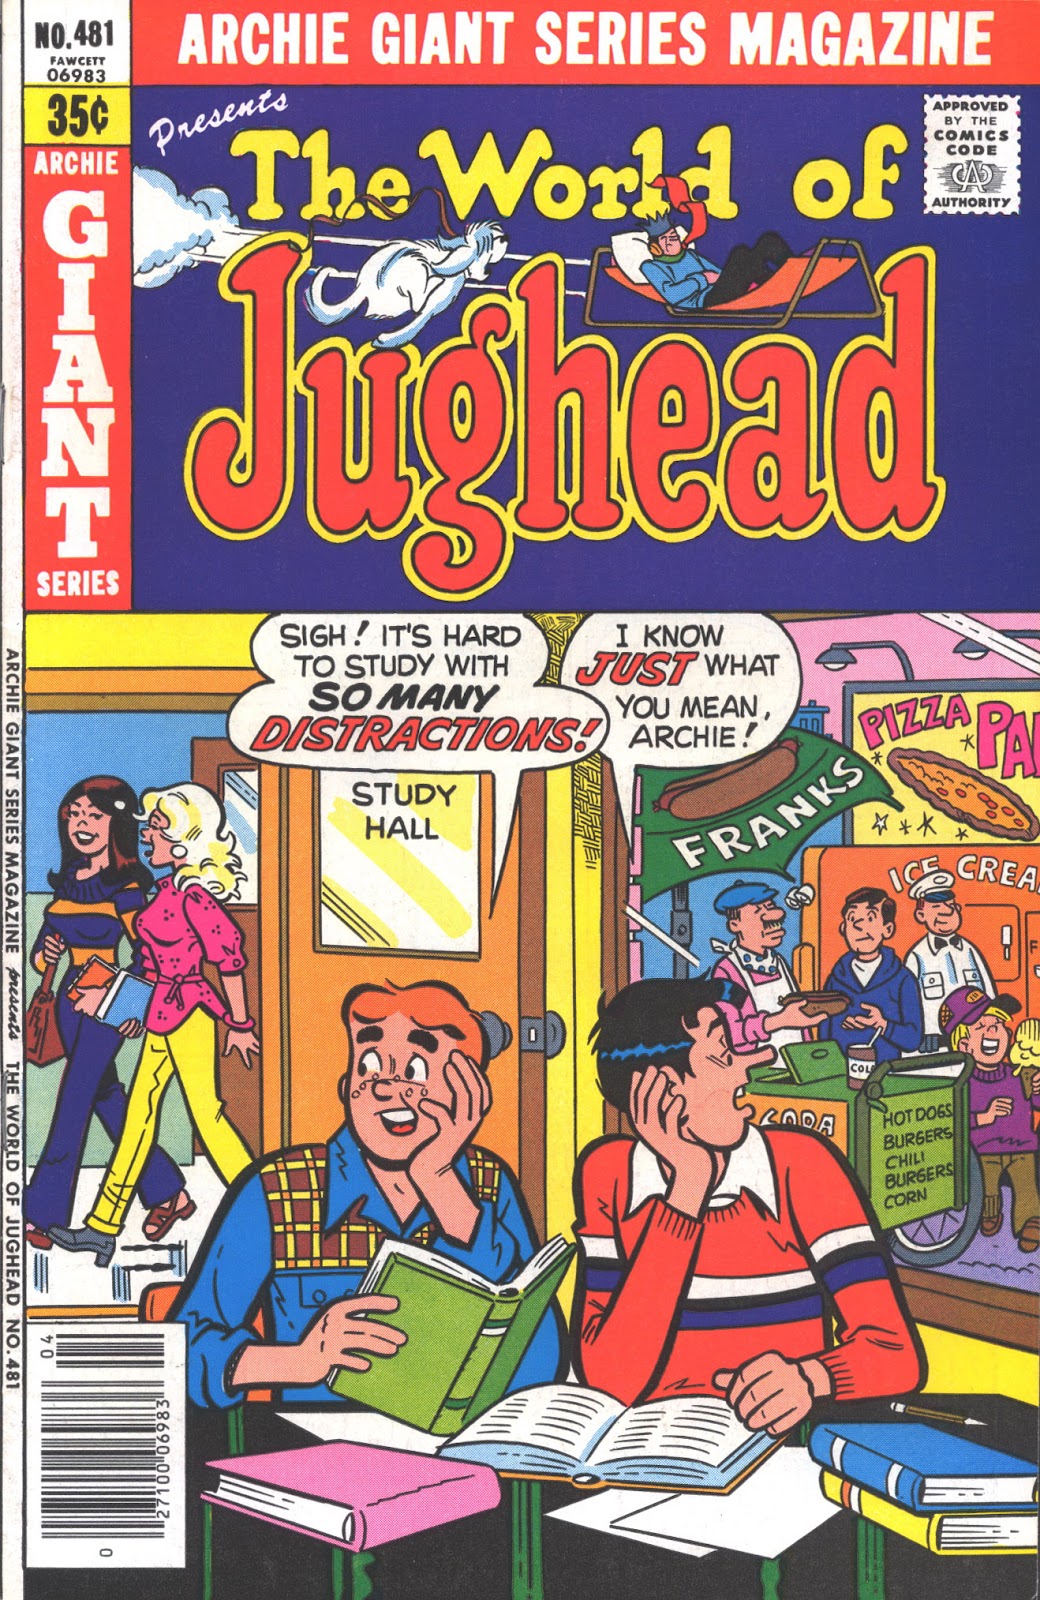 Archie Giant Series Magazine 481 Page 1